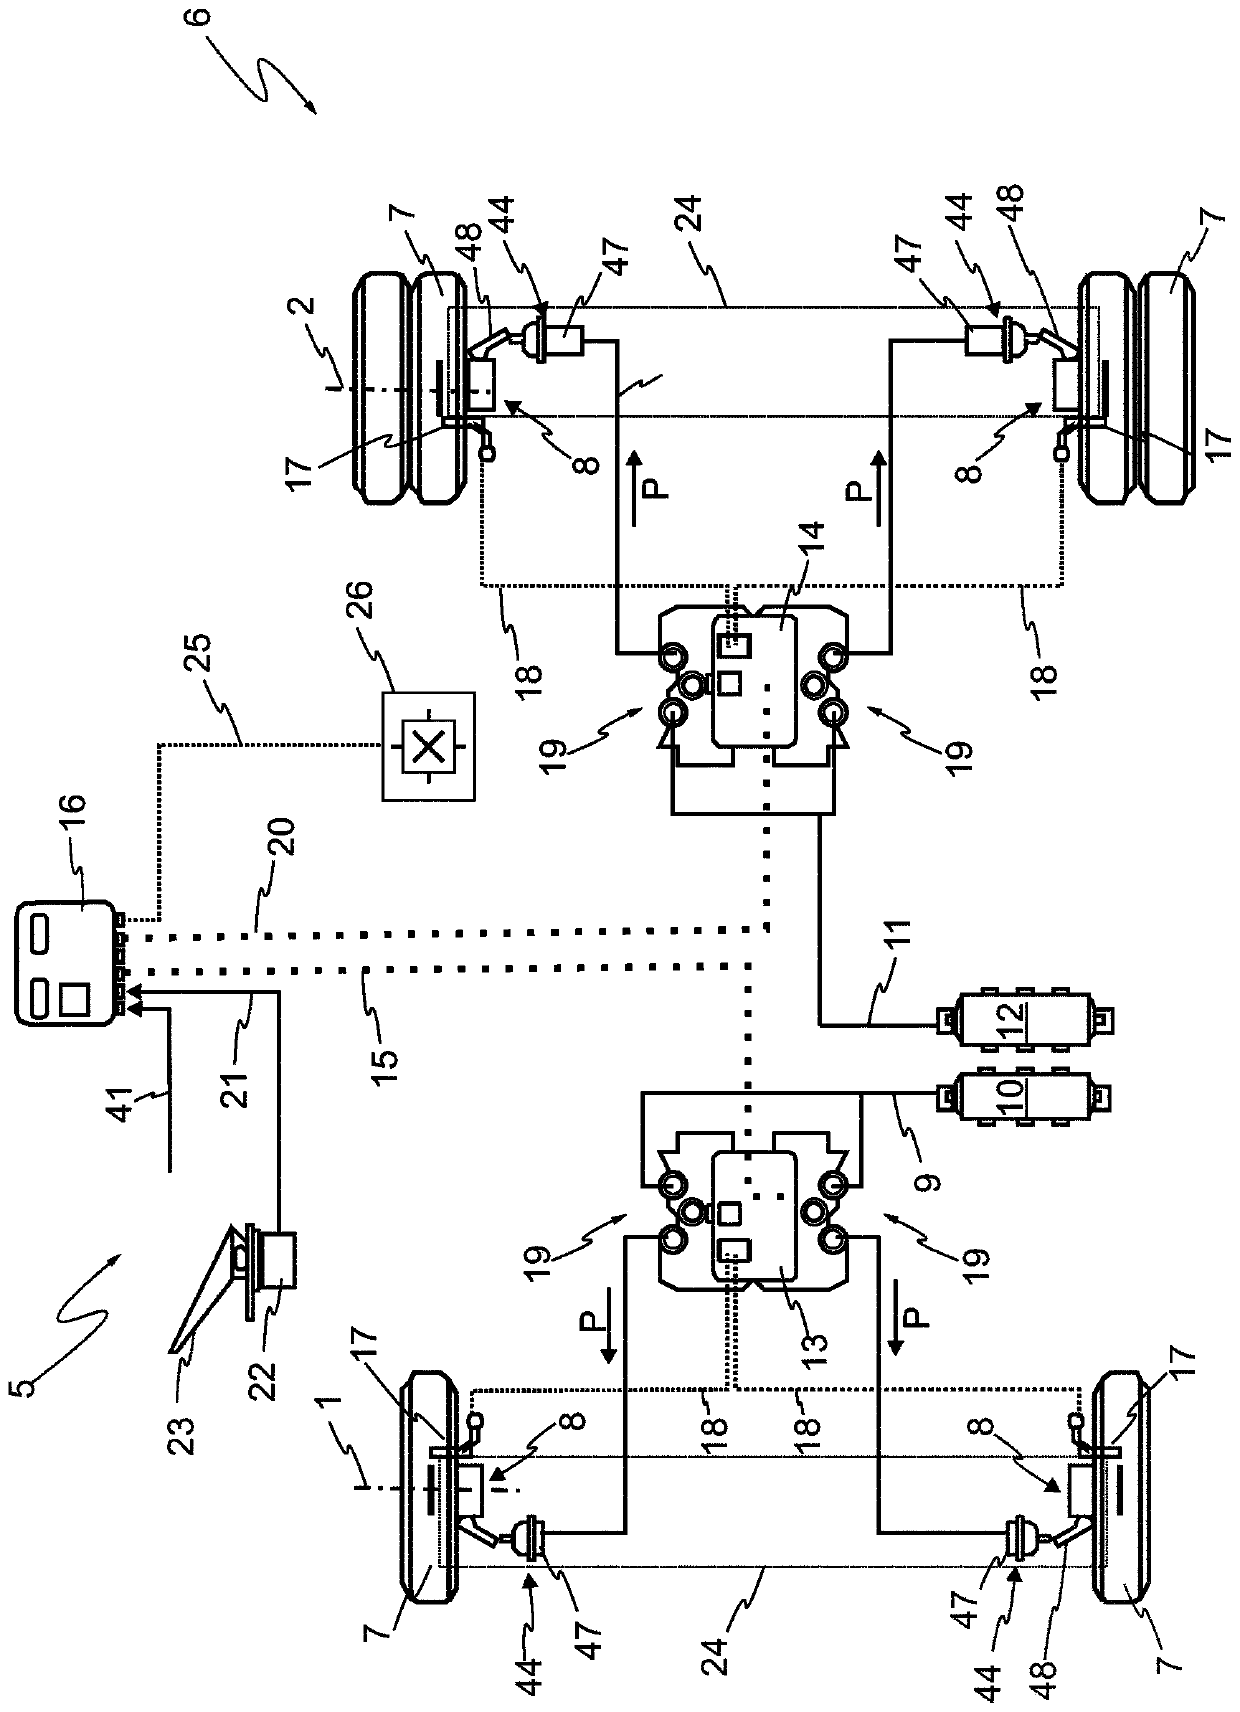 Method for estimating the achievable total braking forces for the automated deceleration of a utility vehicle, braking system and utility vehicle having said braking system